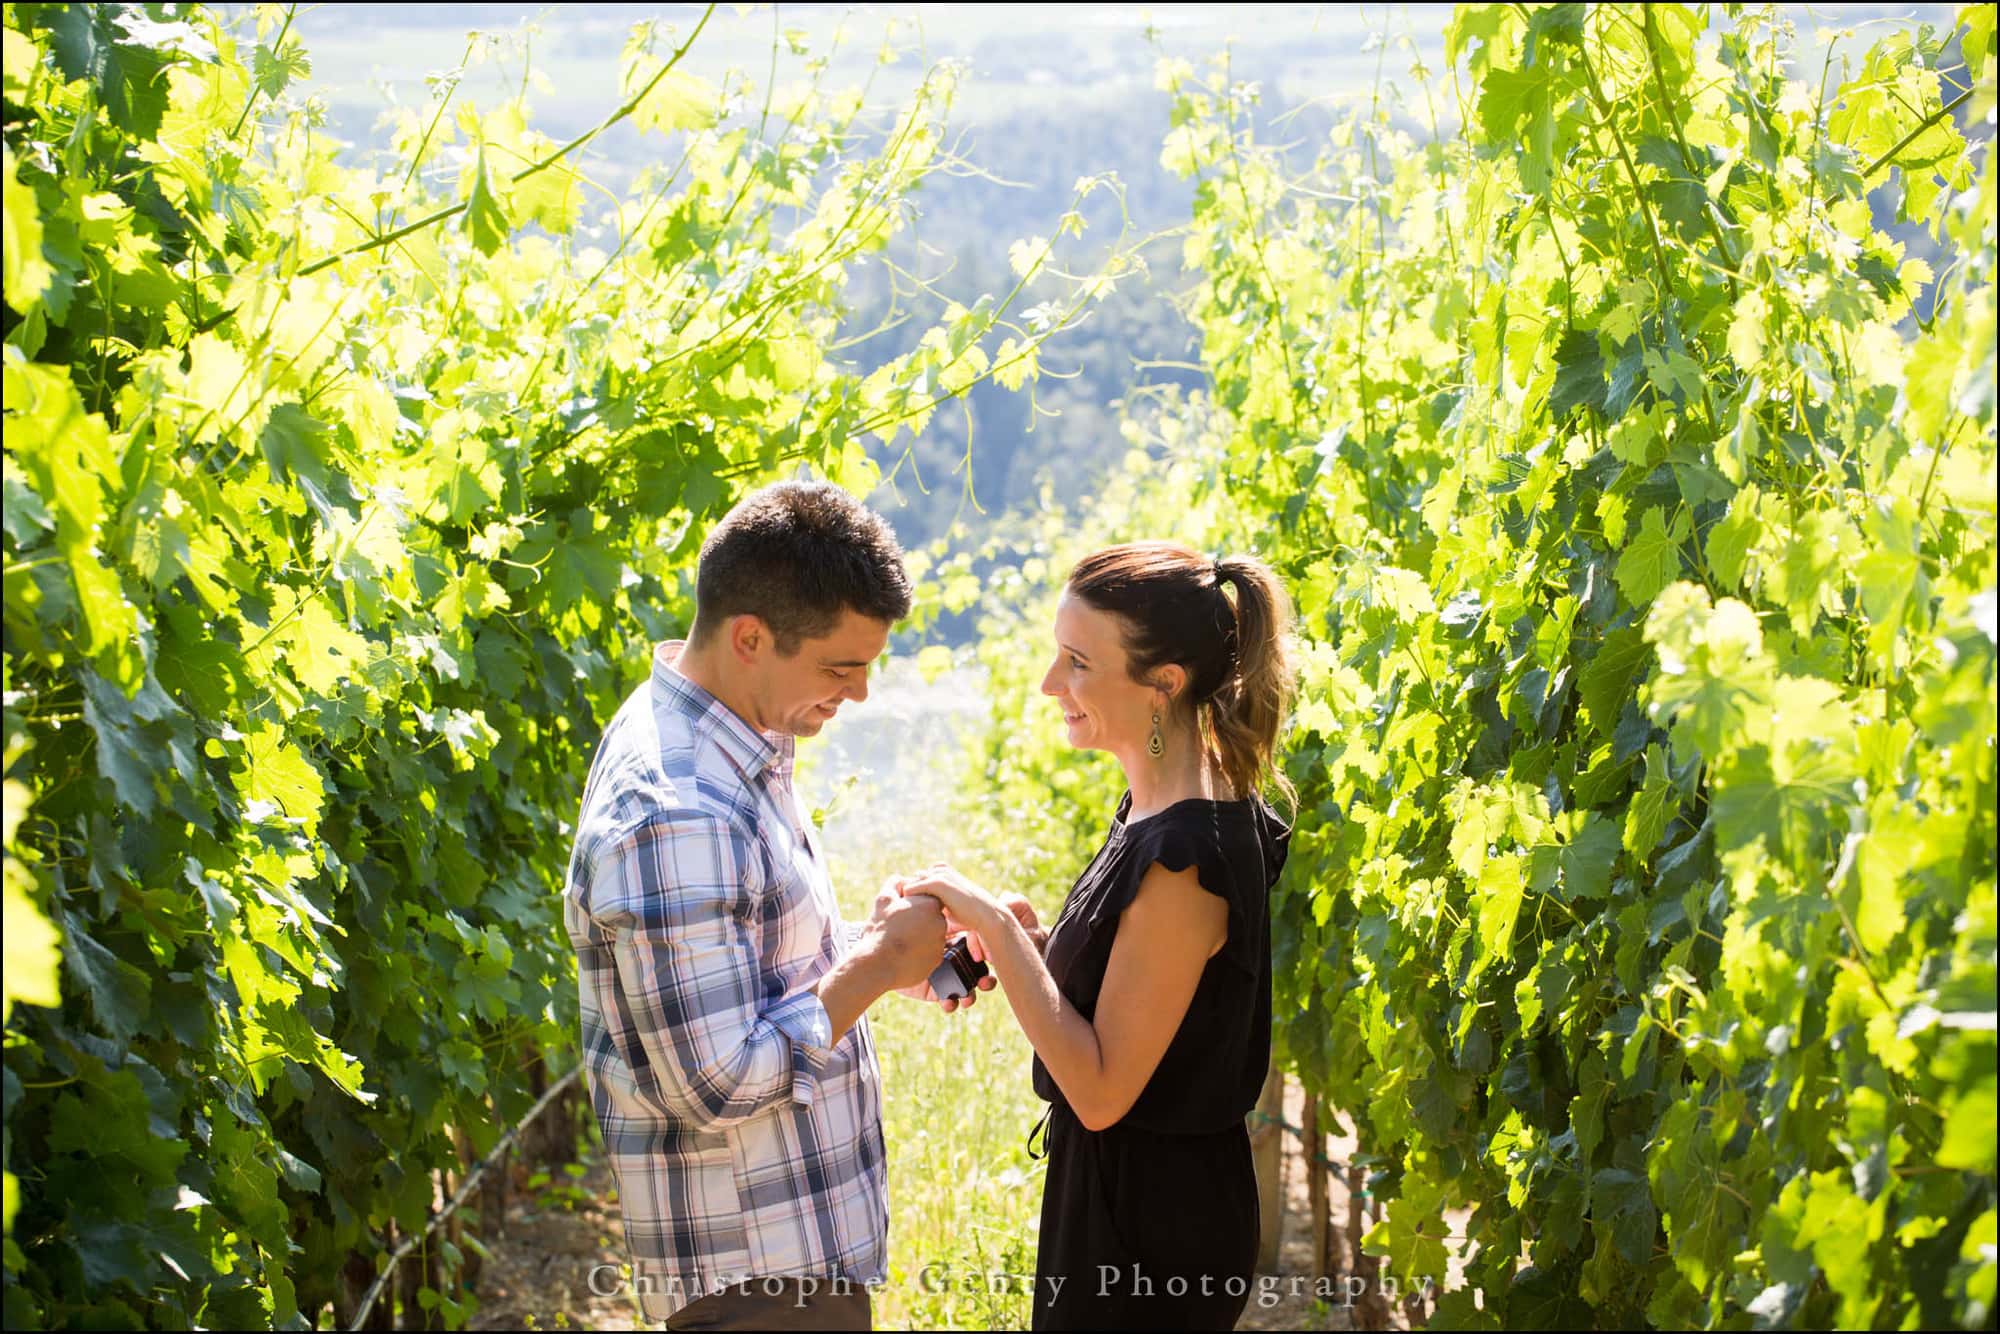 Marriage Proposal Photography in The Napa Valley